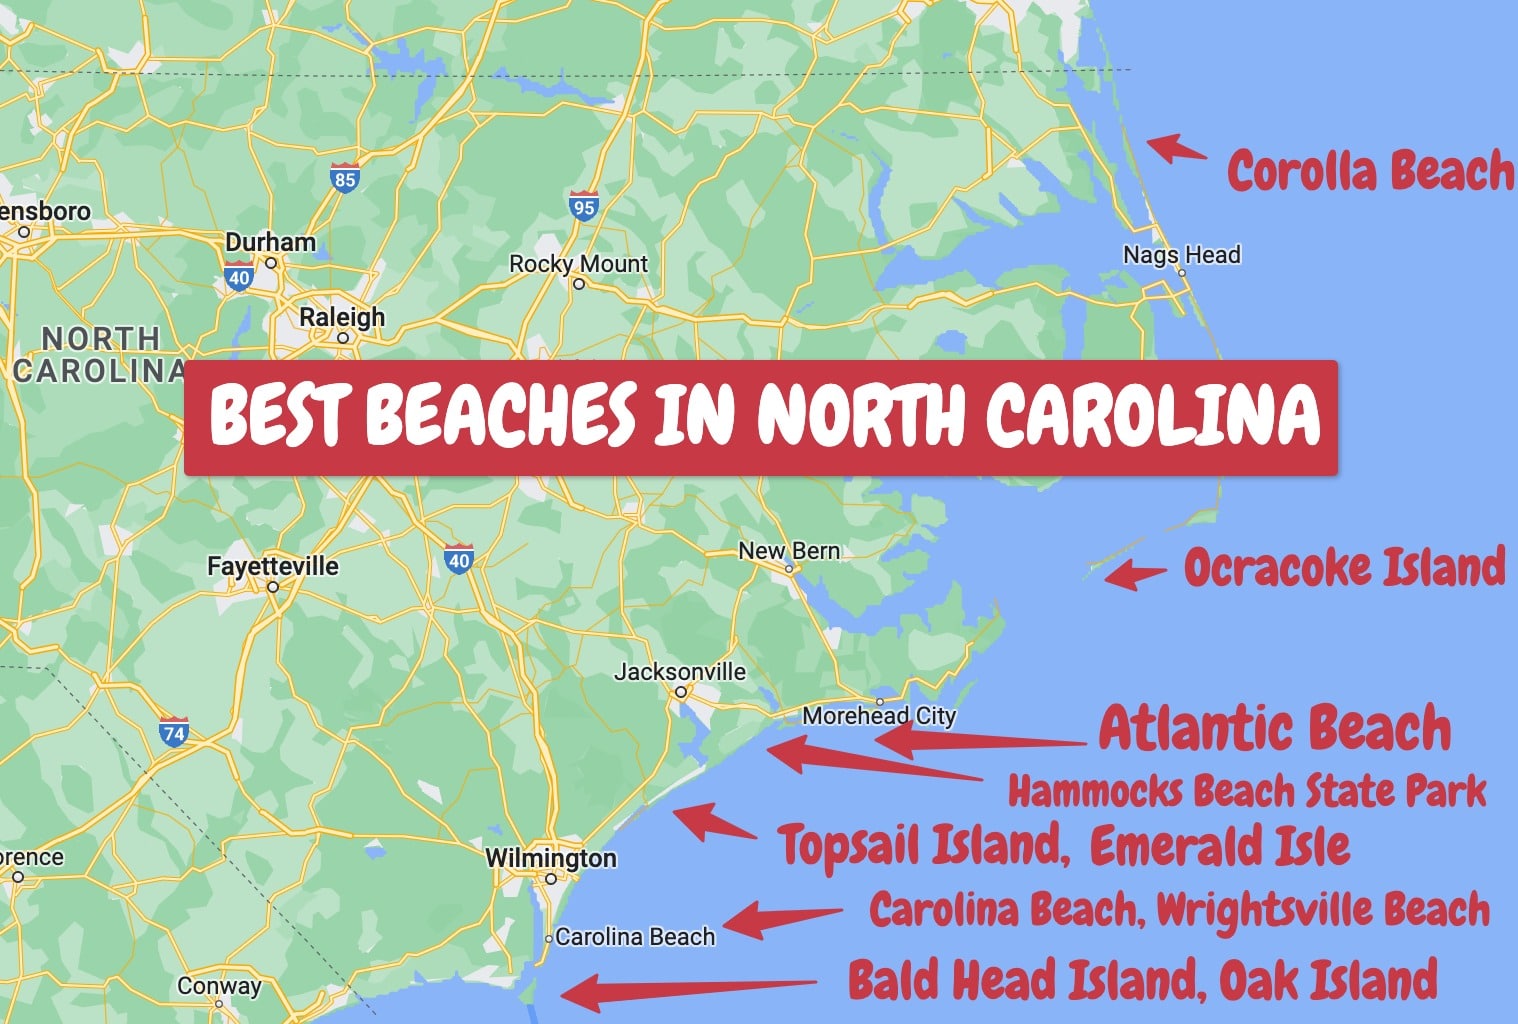 11 Best Beaches in NORTH CAROLINA to Visit in March 2023 swedbank.nl